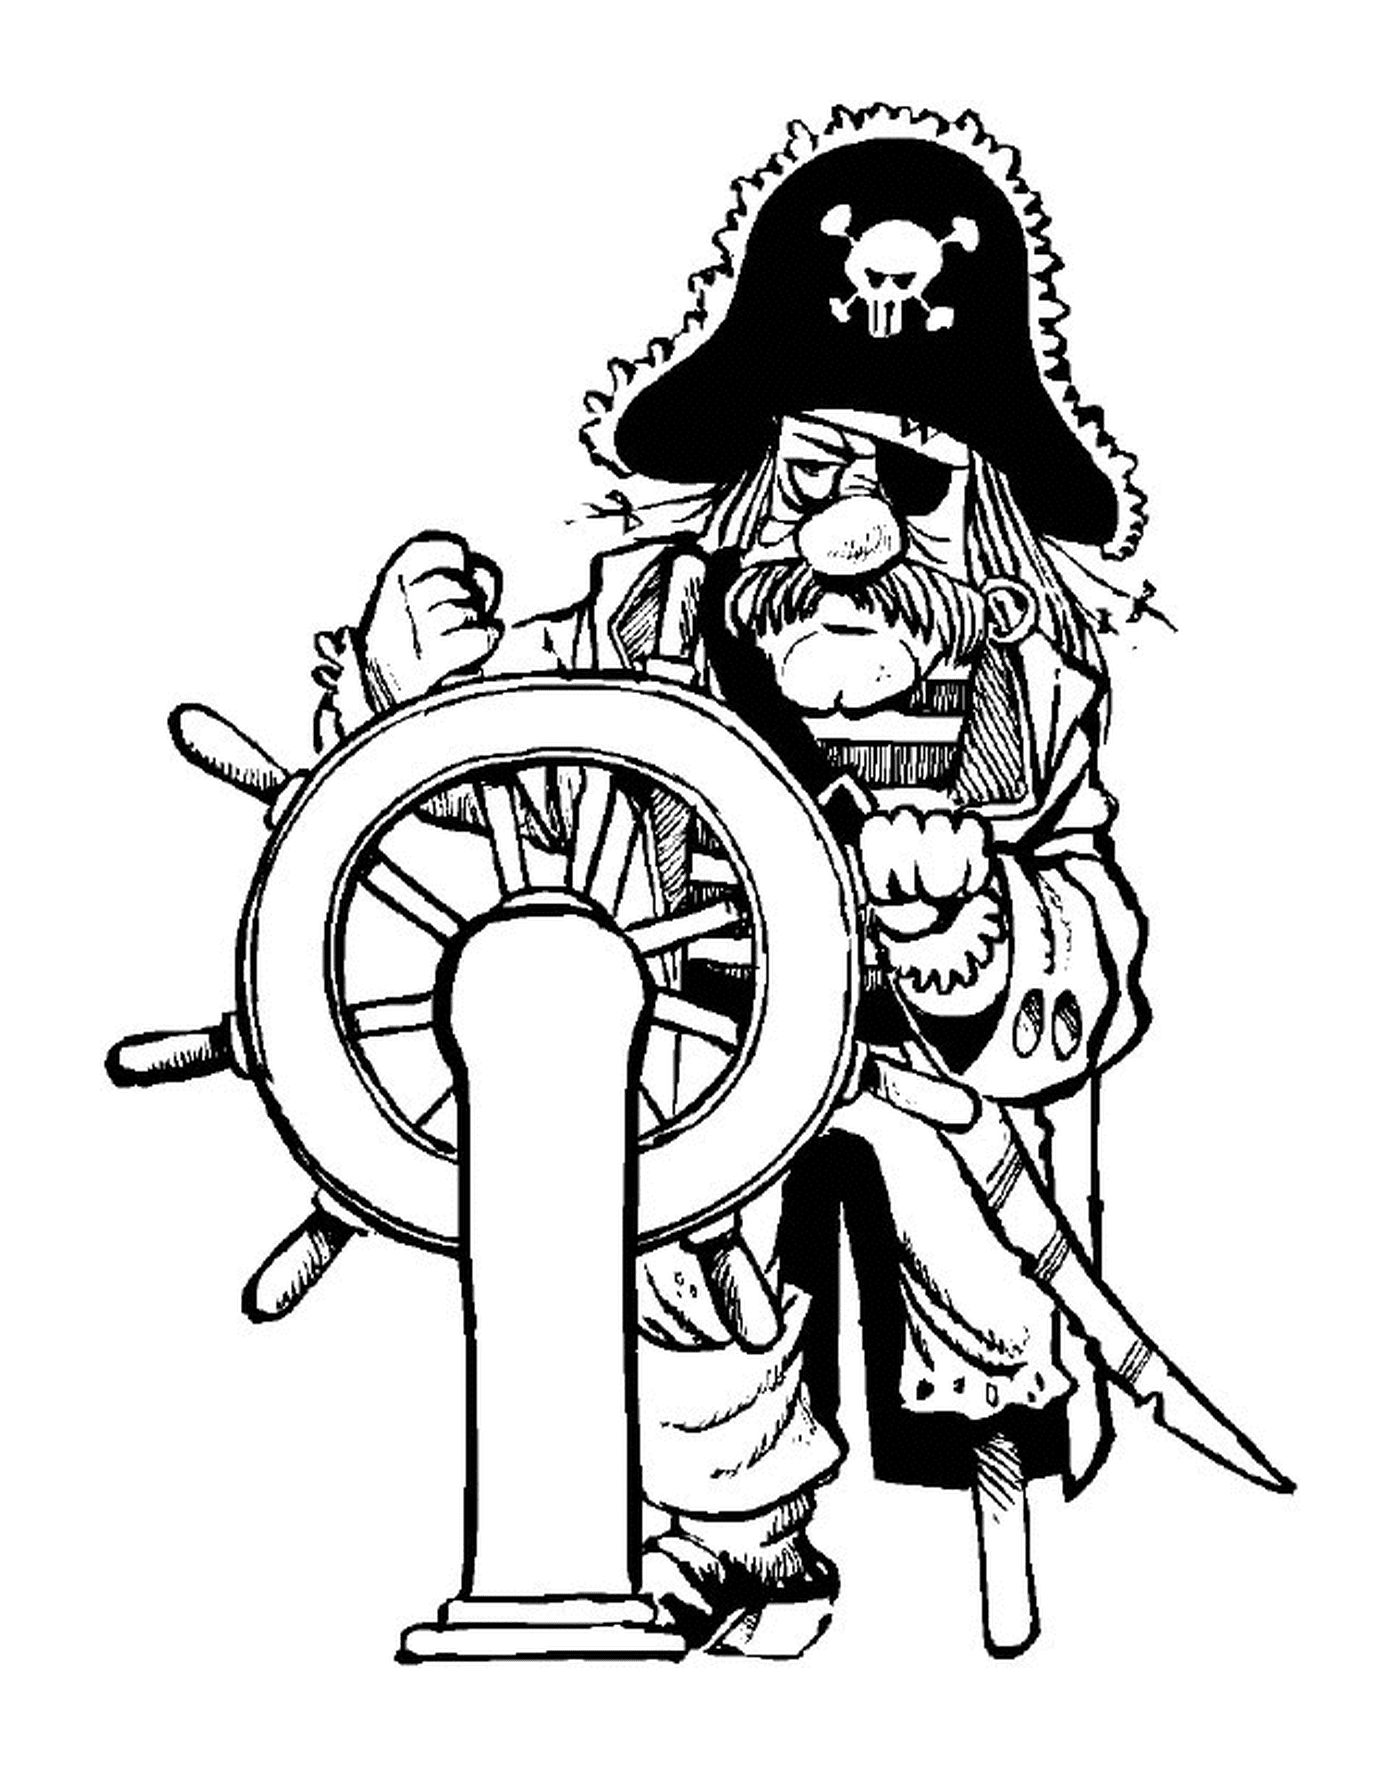  The pirate captain at the helm 